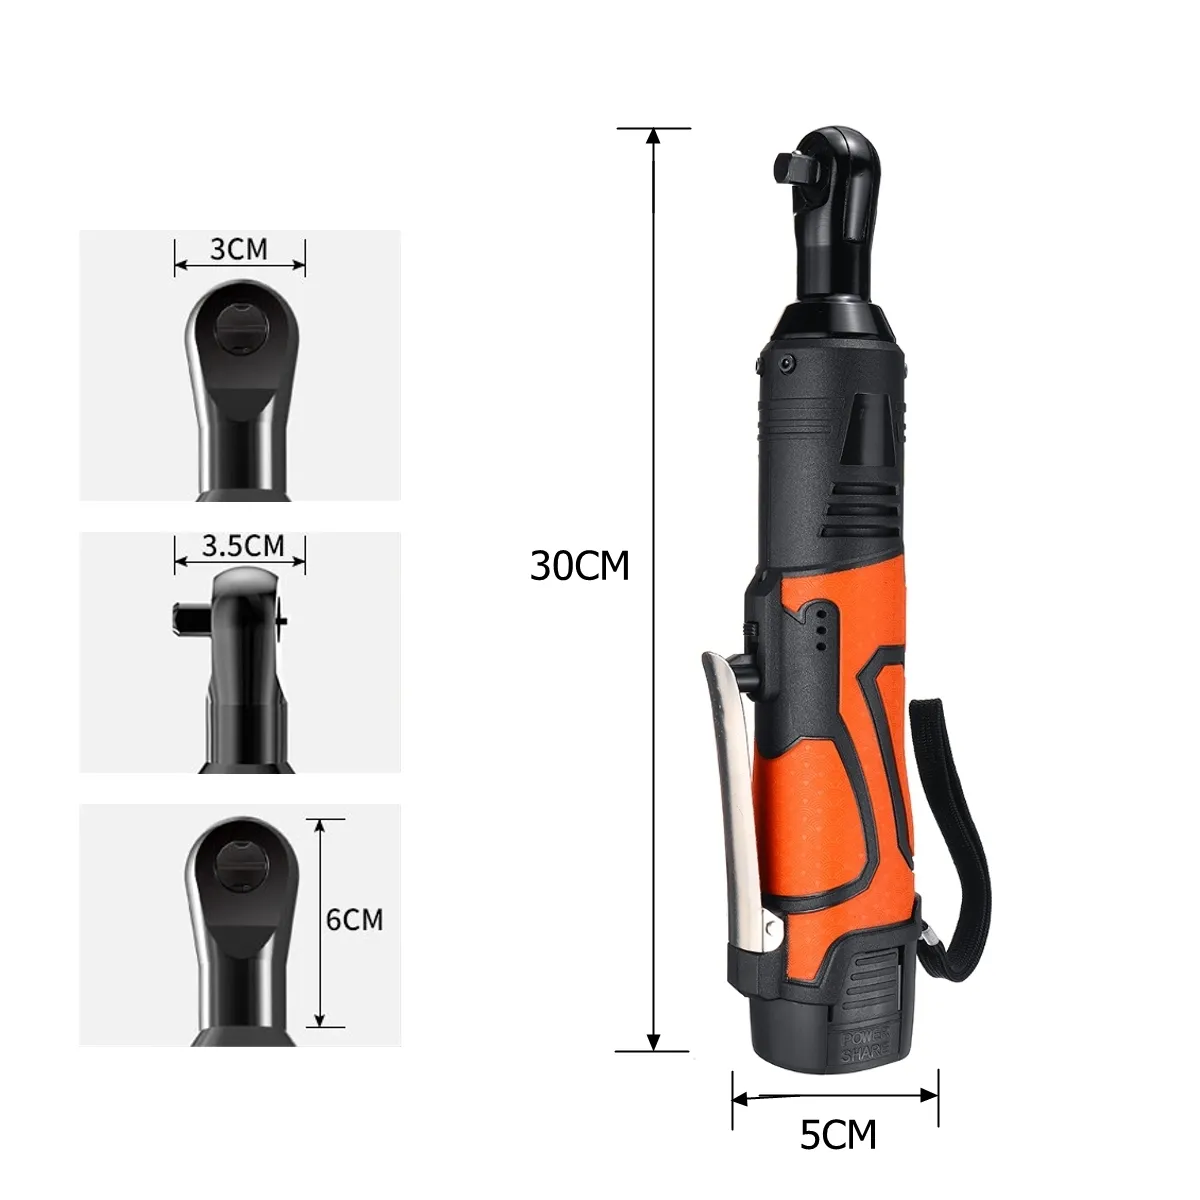 Portable 18V Cordless Electric Wrench 38039039 60Nm Rechargeable Ratchet 90 degree Right Angle Wrench Power tools Set Y2009705926